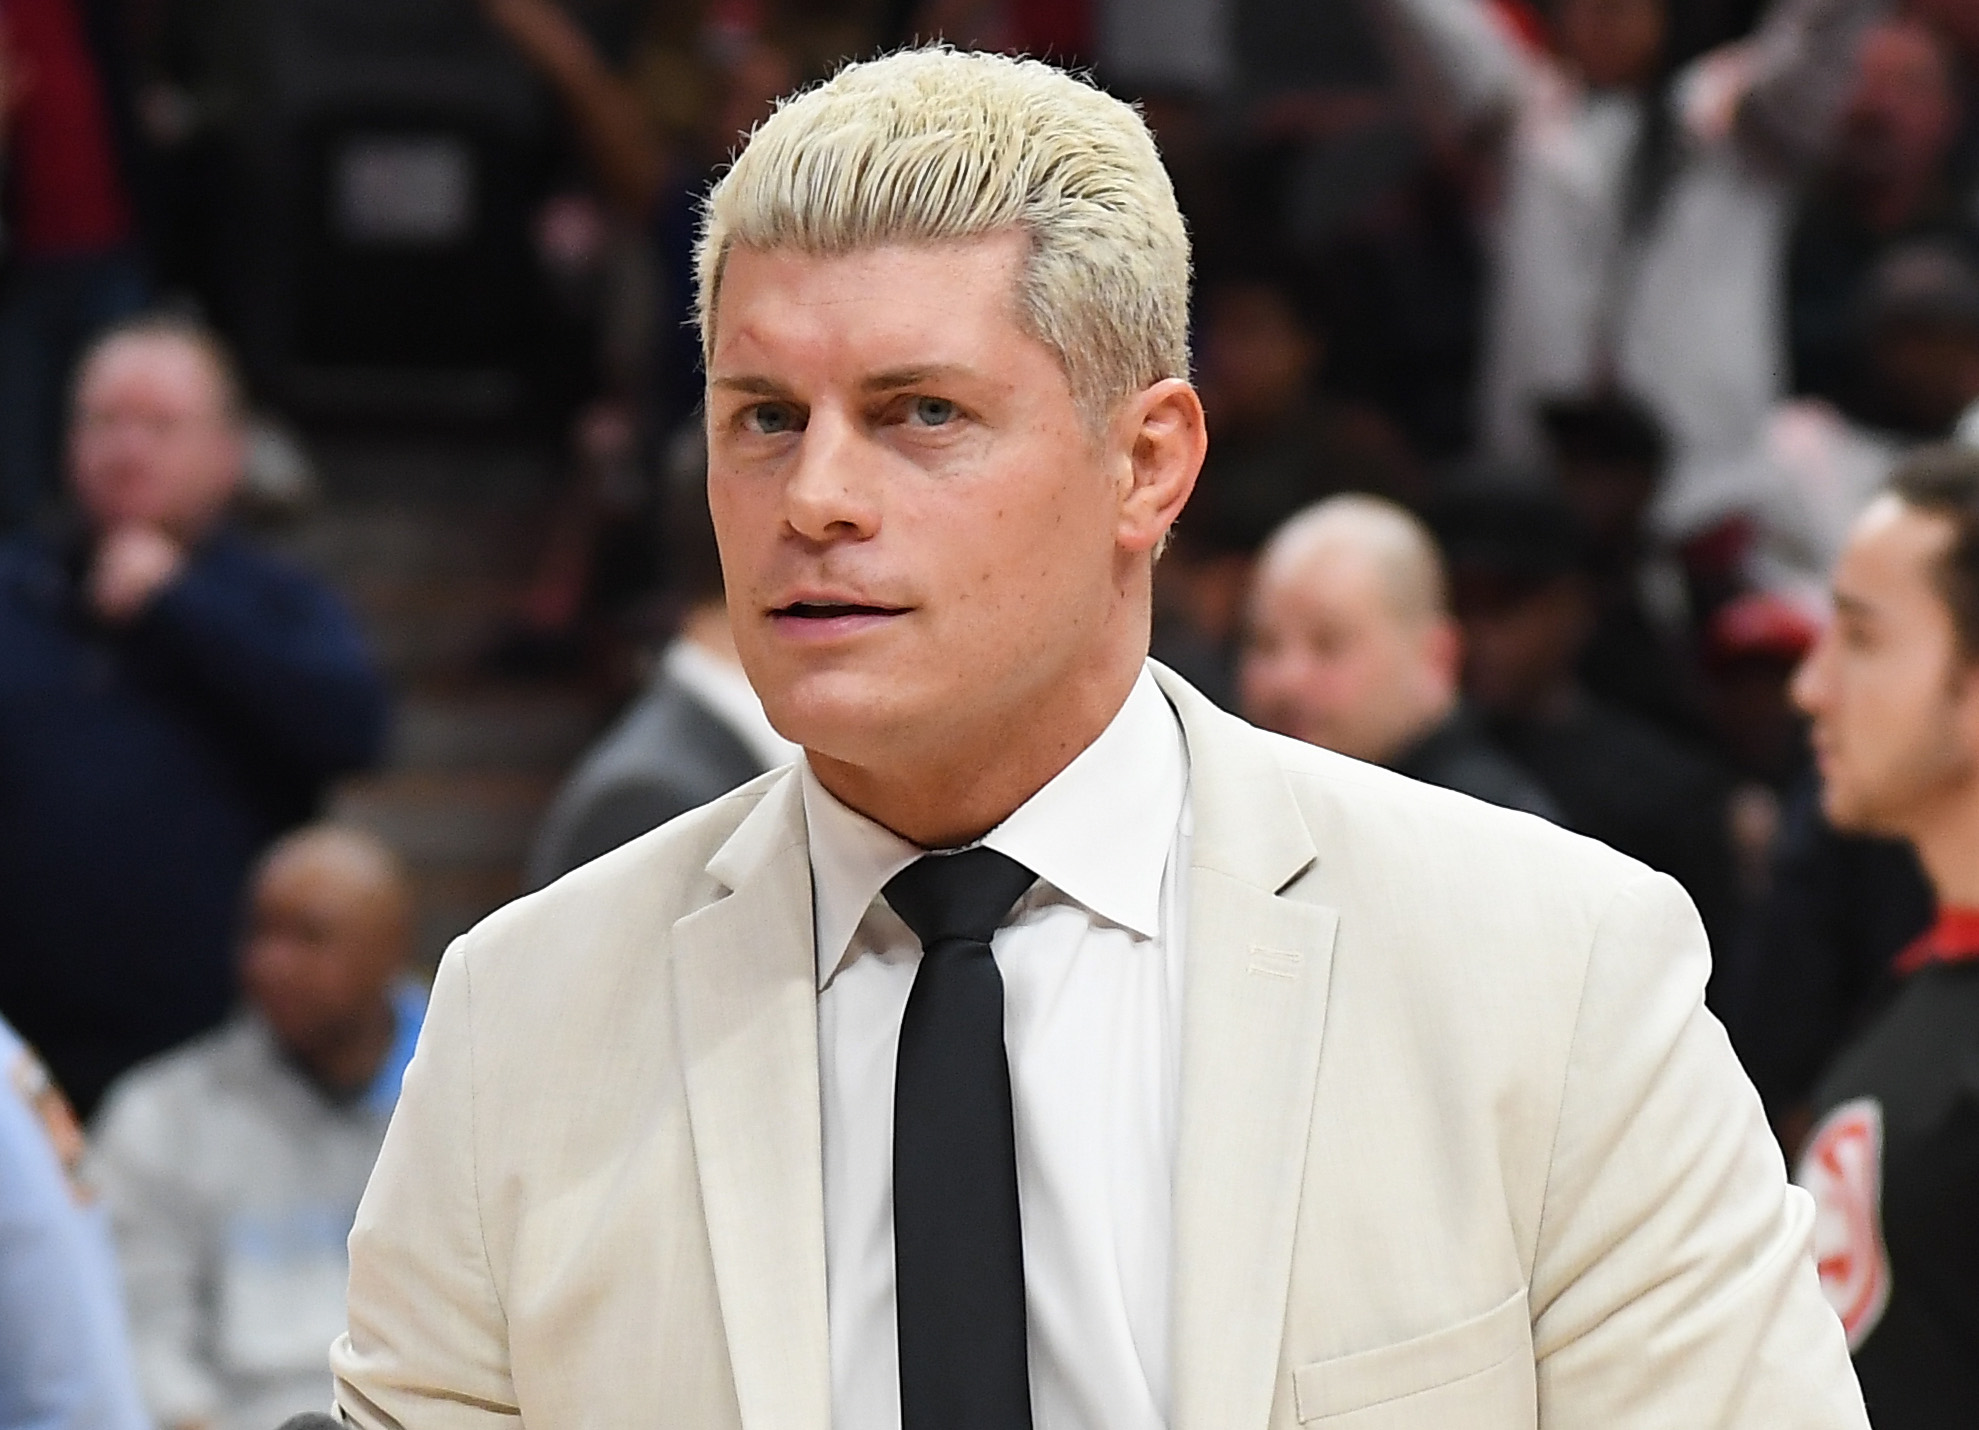 ATLANTA, GEORGIA - FEBRUARY 09:  Cody Rhodes of All Elite Wrestling (AEW) attends New York Knicks vs Atlanta Hawks game at State Farm Arena on February 09, 2020 in Atlanta, Georgia. (Photo by Paras Griffin#SPORT/Getty Images)